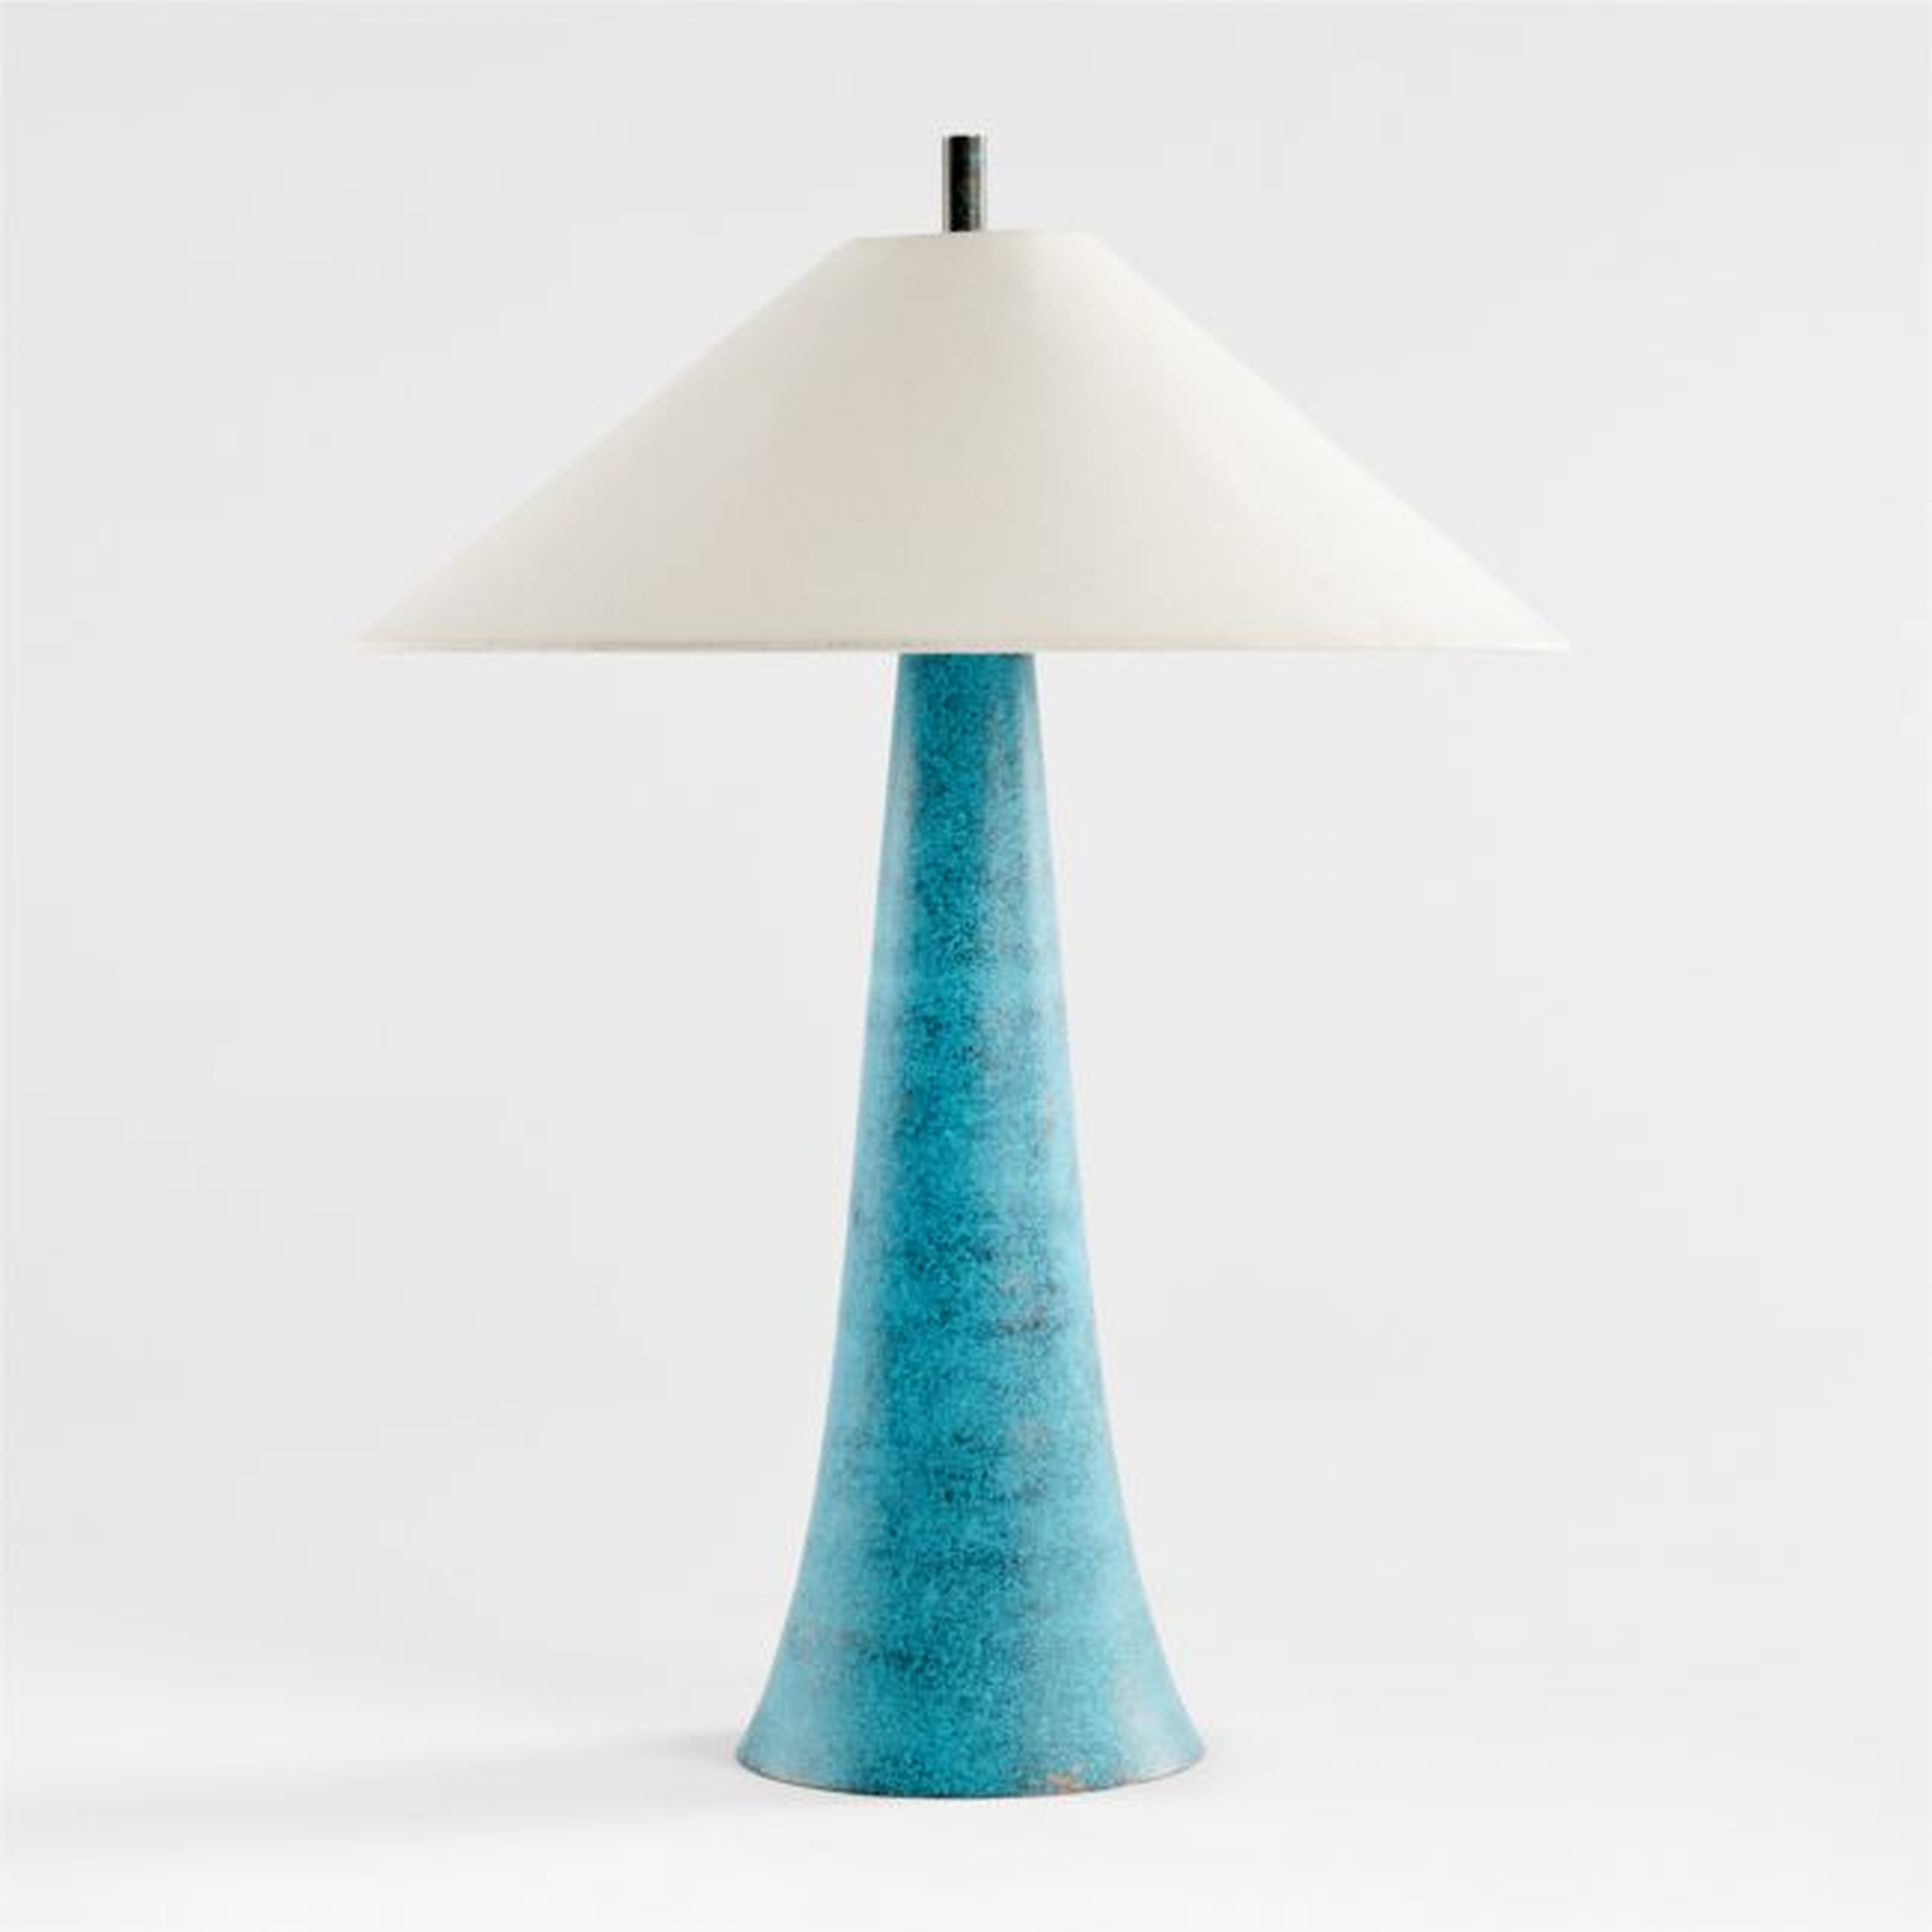 Opry Verdigris Green Table Lamp - Crate and Barrel